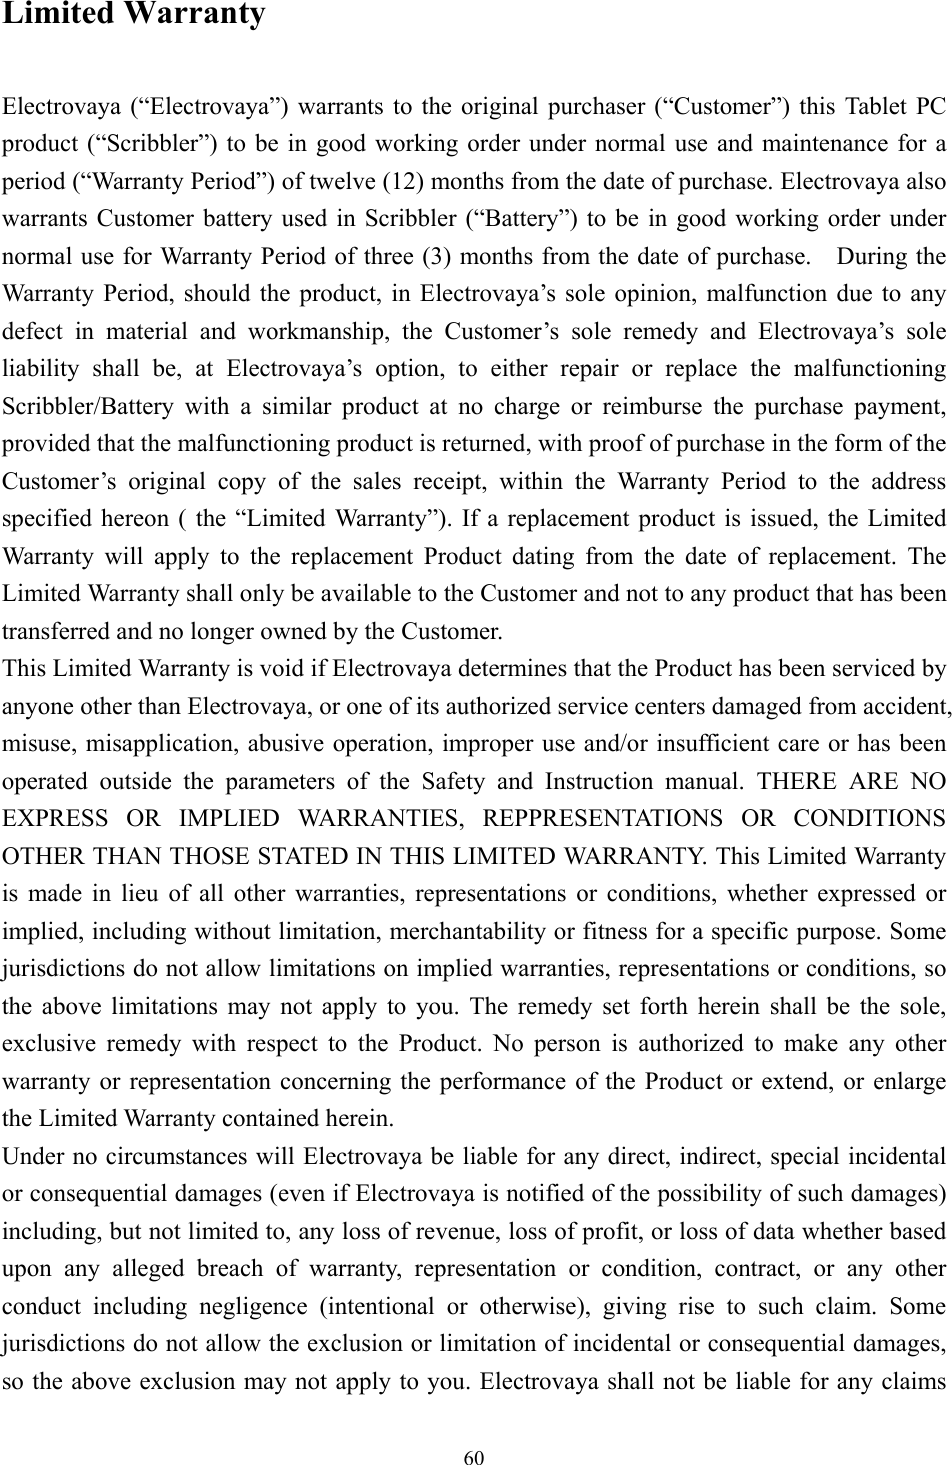 Limited Warranty  Electrovaya (“Electrovaya”) warrants to the original purchaser (“Customer”) this Tablet PC product (“Scribbler”) to be in good working order under normal use and maintenance for a period (“Warranty Period”) of twelve (12) months from the date of purchase. Electrovaya also warrants Customer battery used in Scribbler (“Battery”) to be in good working order under normal use for Warranty Period of three (3) months from the date of purchase.    During the Warranty Period, should the product, in Electrovaya’s sole opinion, malfunction due to any defect in material and workmanship, the Customer’s sole remedy and Electrovaya’s sole liability shall be, at Electrovaya’s option, to either repair or replace the malfunctioning Scribbler/Battery with a similar product at no charge or reimburse the purchase payment, provided that the malfunctioning product is returned, with proof of purchase in the form of the Customer’s original copy of the sales receipt, within the Warranty Period to the address specified hereon ( the “Limited Warranty”). If a replacement product is issued, the Limited Warranty will apply to the replacement Product dating from the date of replacement. The Limited Warranty shall only be available to the Customer and not to any product that has been transferred and no longer owned by the Customer. This Limited Warranty is void if Electrovaya determines that the Product has been serviced by anyone other than Electrovaya, or one of its authorized service centers damaged from accident, misuse, misapplication, abusive operation, improper use and/or insufficient care or has been operated outside the parameters of the Safety and Instruction manual. THERE ARE NO EXPRESS OR IMPLIED WARRANTIES, REPPRESENTATIONS OR CONDITIONS OTHER THAN THOSE STATED IN THIS LIMITED WARRANTY. This Limited Warranty is made in lieu of all other warranties, representations or conditions, whether expressed or implied, including without limitation, merchantability or fitness for a specific purpose. Some jurisdictions do not allow limitations on implied warranties, representations or conditions, so the above limitations may not apply to you. The remedy set forth herein shall be the sole, exclusive remedy with respect to the Product. No person is authorized to make any other warranty or representation concerning the performance of the Product or extend, or enlarge the Limited Warranty contained herein. Under no circumstances will Electrovaya be liable for any direct, indirect, special incidental or consequential damages (even if Electrovaya is notified of the possibility of such damages) including, but not limited to, any loss of revenue, loss of profit, or loss of data whether based upon any alleged breach of warranty, representation or condition, contract, or any other conduct including negligence (intentional or otherwise), giving rise to such claim. Some jurisdictions do not allow the exclusion or limitation of incidental or consequential damages, so the above exclusion may not apply to you. Electrovaya shall not be liable for any claims  60